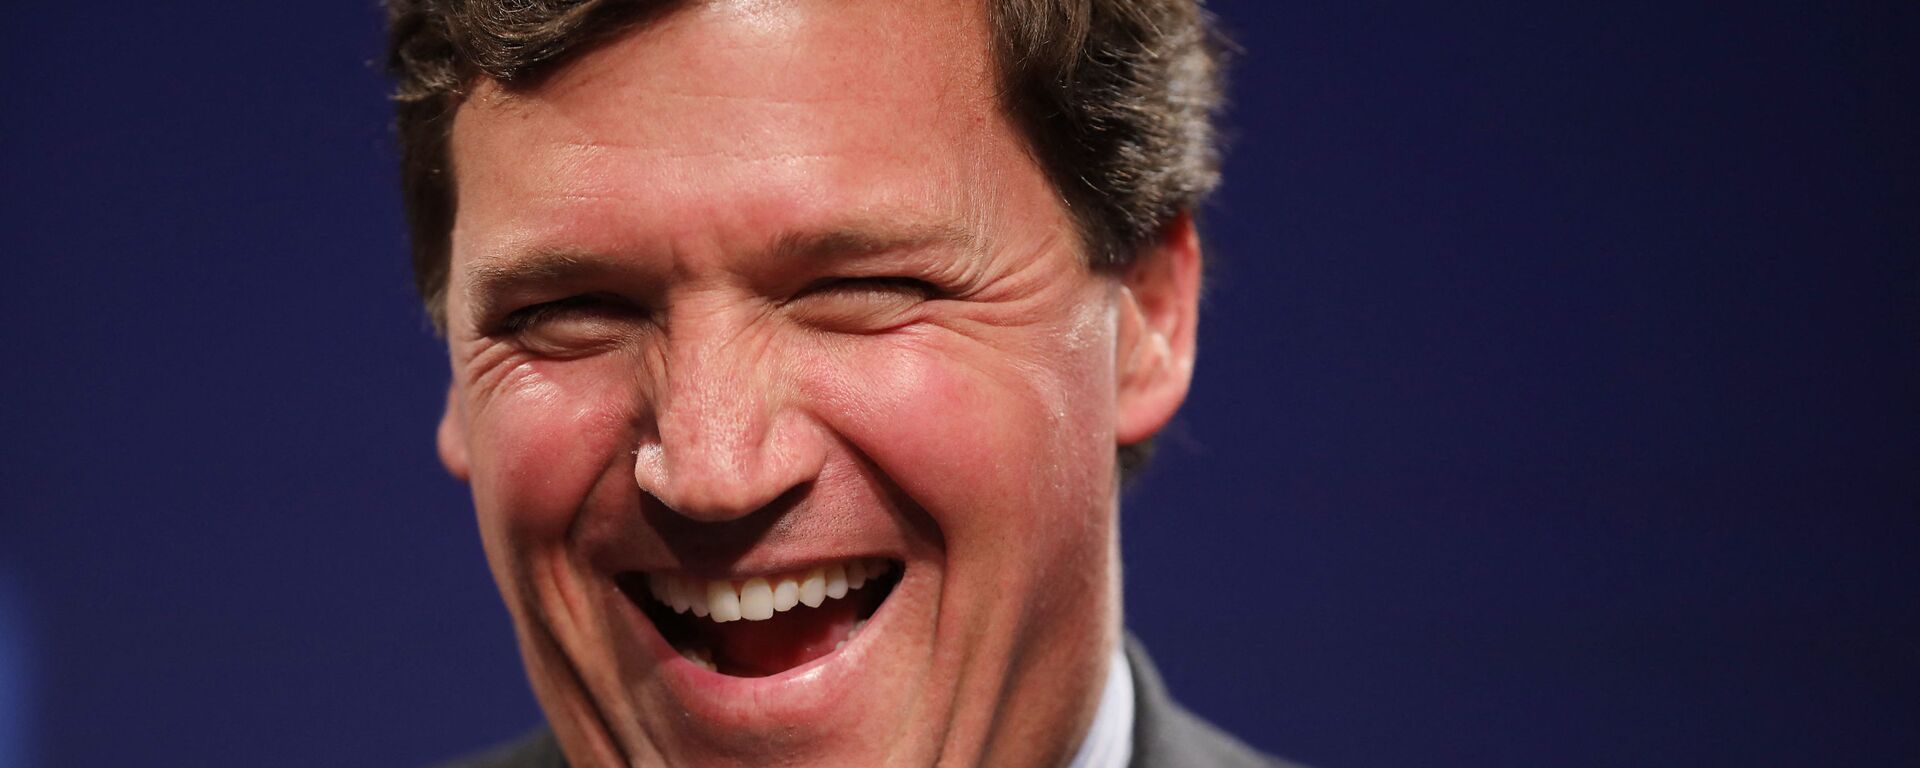 WASHINGTON, DC - MARCH 29: Fox News host Tucker Carlson discusses 'Populism and the Right' during the National Review Institute's Ideas Summit at the Mandarin Oriental Hotel March 29, 2019 in Washington, DC. Carlson talked about a large variety of topics including dropping testosterone levels, increasing rates of suicide, unemployment, drug addiction and social hierarchy at the summit, which had the theme 'The Case for the American Experiment.'  - Sputnik International, 1920, 05.05.2023